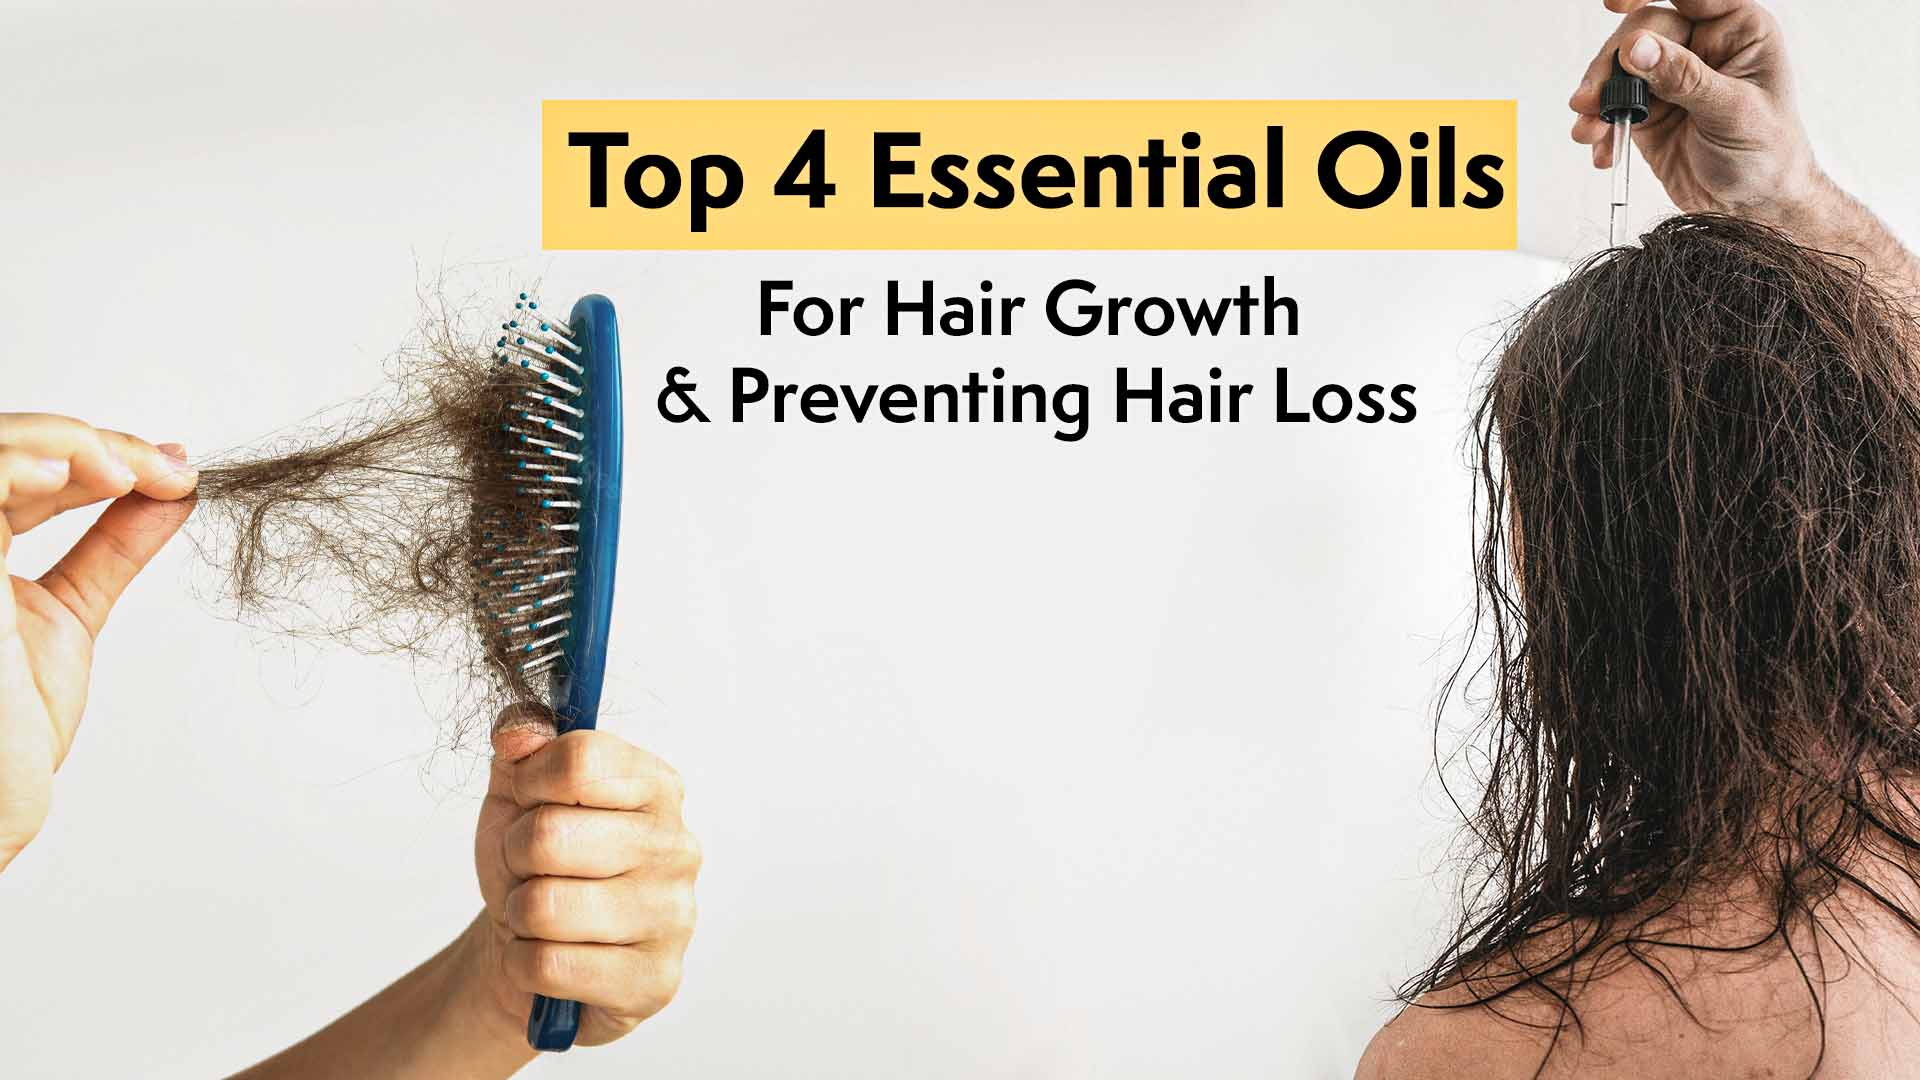 Top 4 Essential Oils For Hair Growth & Preventing Hair Loss